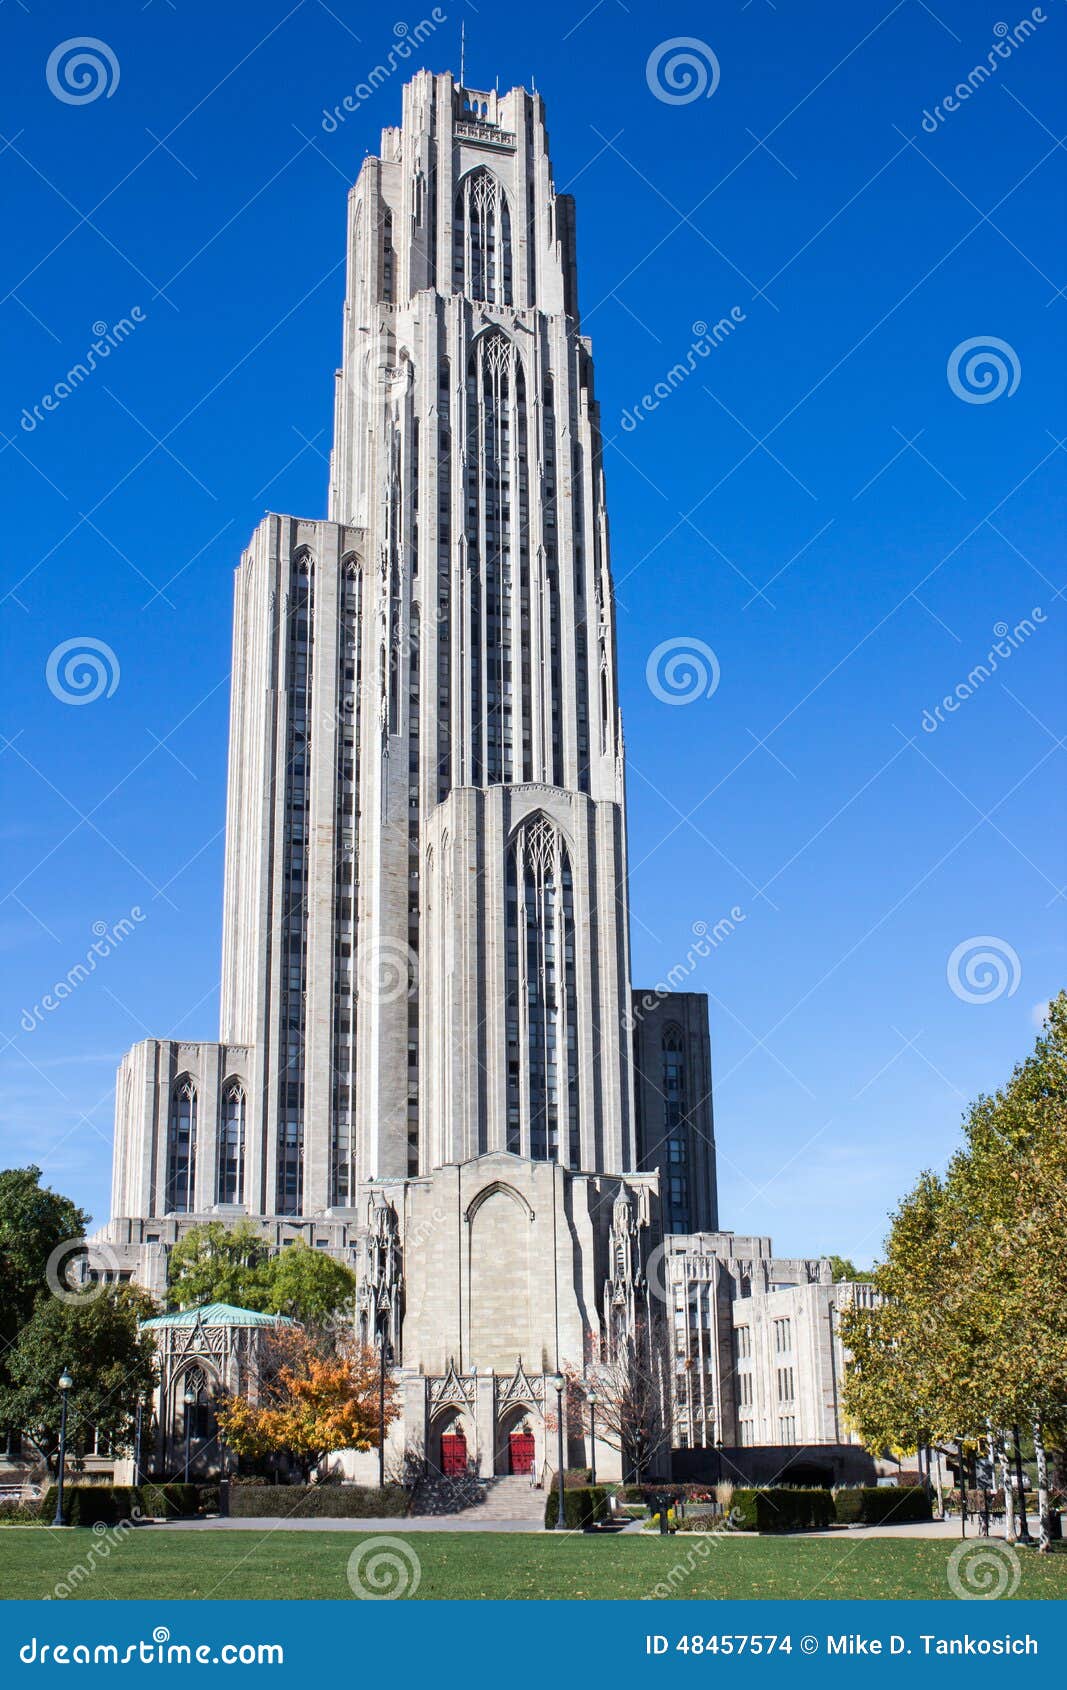 Pennsylvania Photo Cathedral of Learning 1961-2 Pittsburgh 